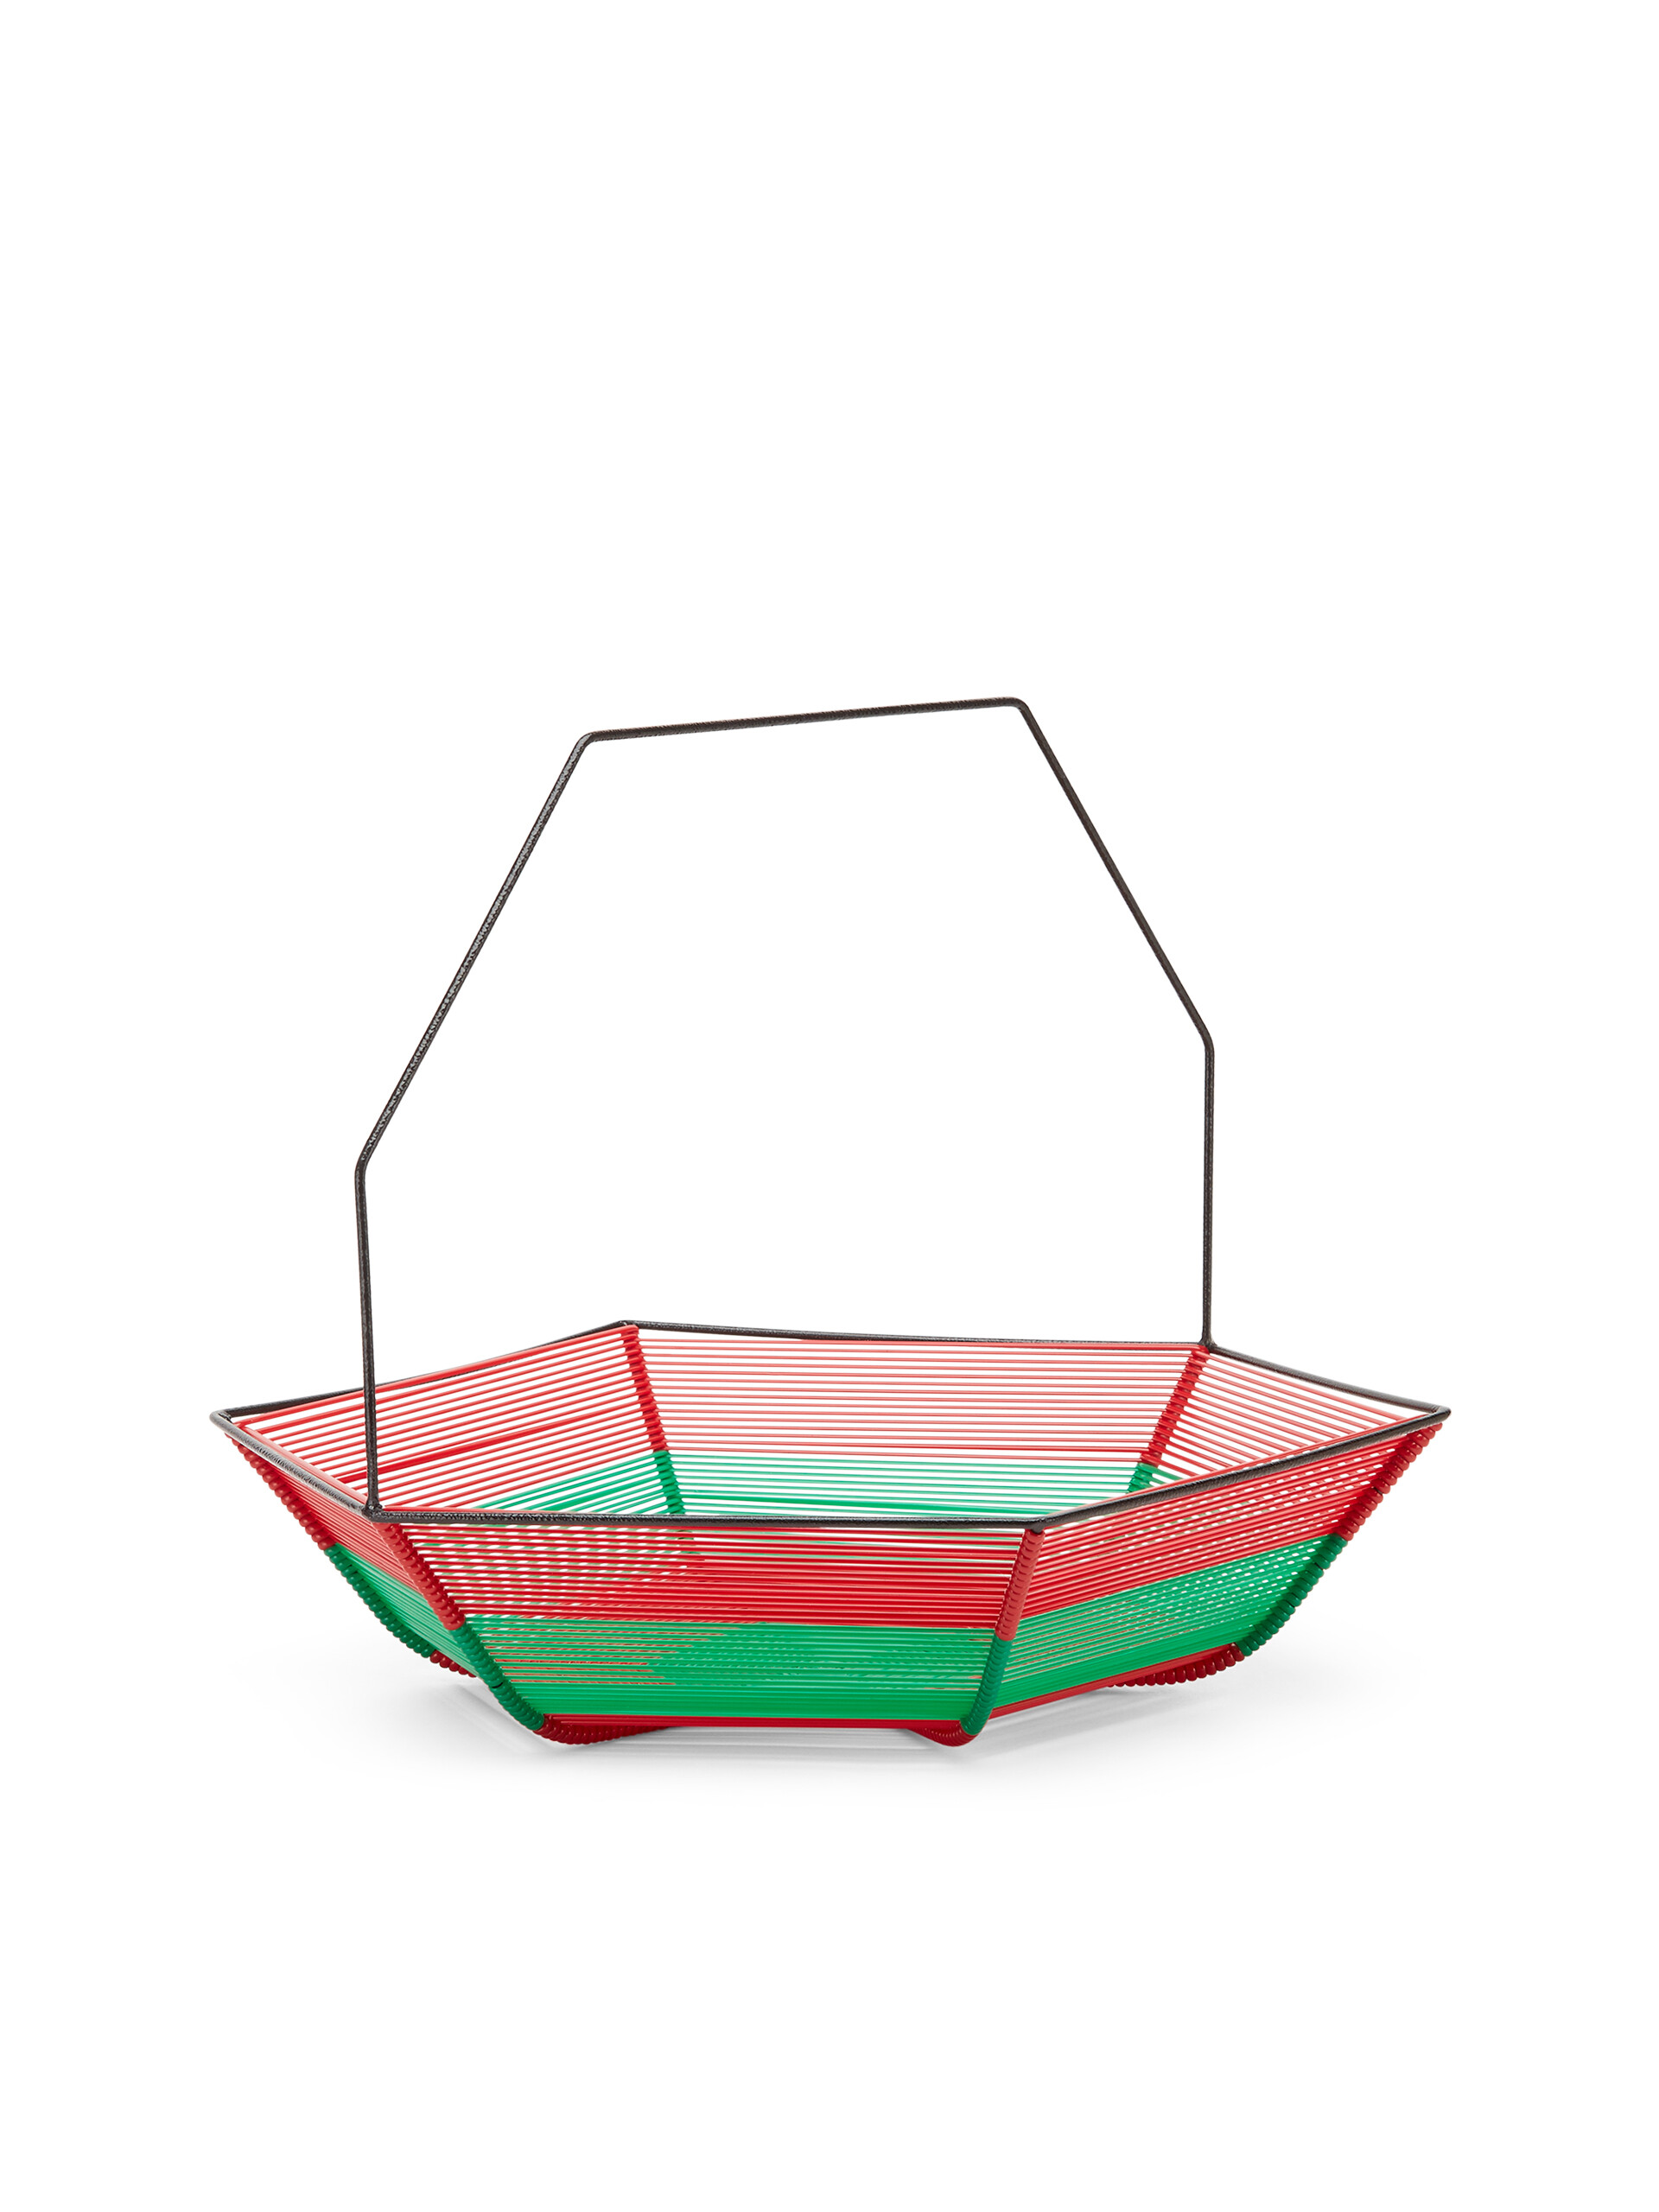 MARNI MARKET iron hexagonal fruit holder with green and red PVC - Home Accessories - Image 2